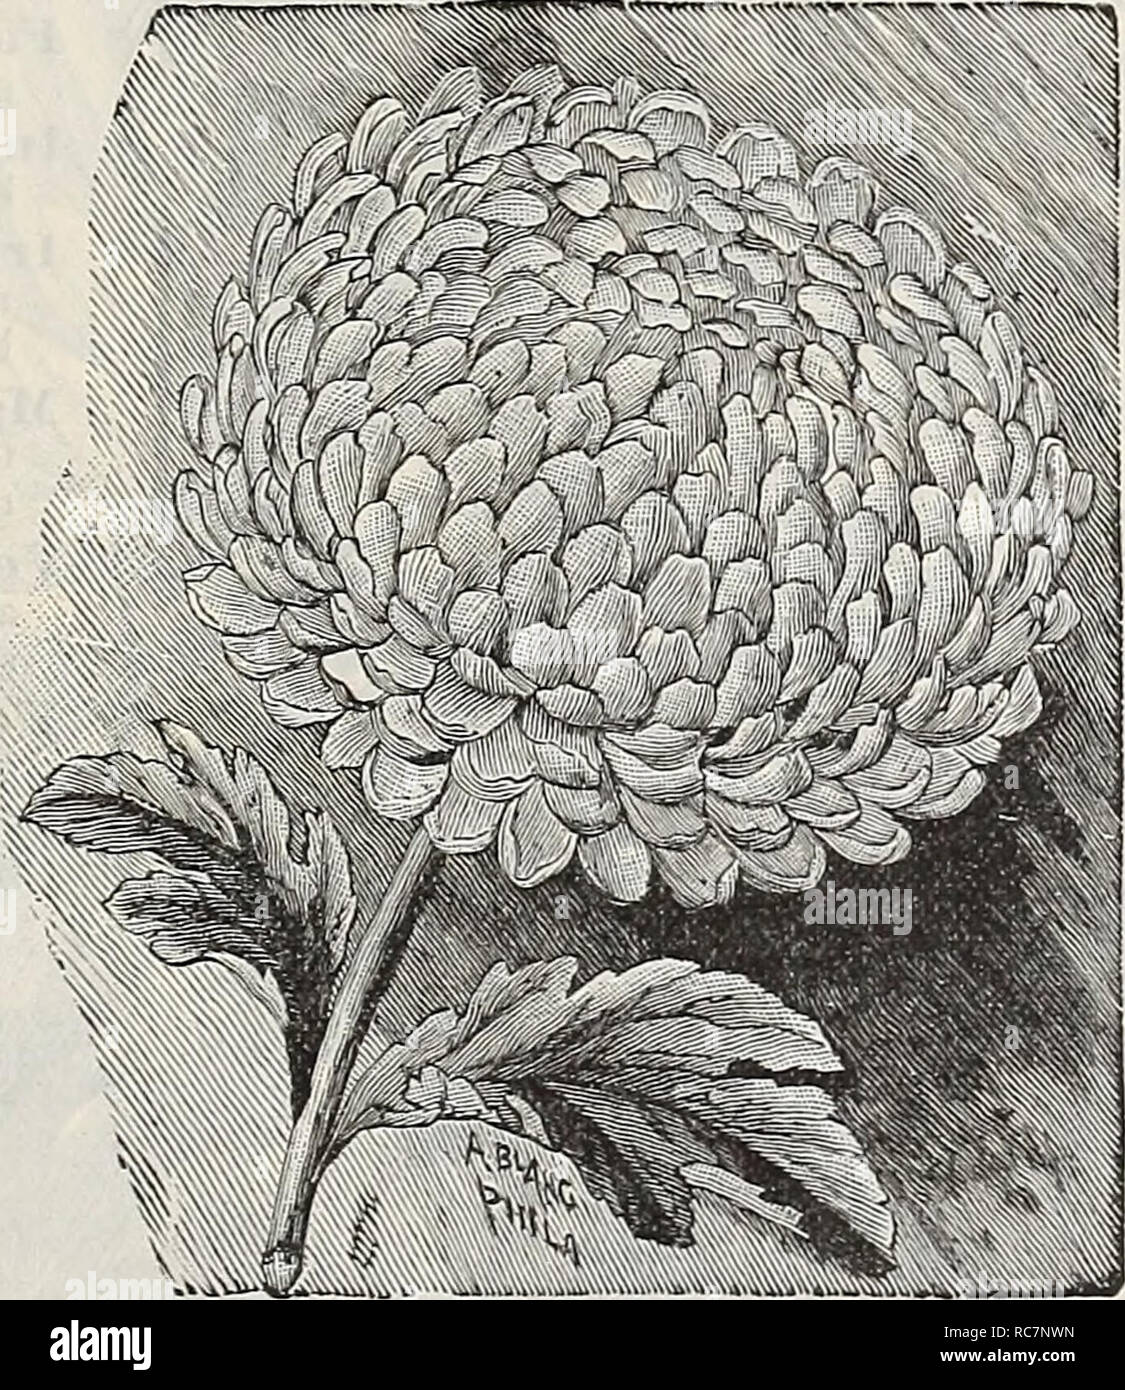 . Dreer's garden calendar : 1898. Seeds Catalogs; Nursery stock Catalogs; Gardening Catalogs; Flowers Seeds Catalogs; Vegetables Seeds Catalogs. Ostrich Plume Chrysanthemum. Cissus Discolor. A beautiful climber for hanging 5asket&gt;, with mottled and marbled ;rimsoii and green foliage. (See rut.) 20 cts. each. Cestrum Parqui. (Night=blooining Jasamine.) A beautiful tender shrub of easy ;uitivation, with small greenish- vhite flowers, of delightful fra- grance, which is dispensed during he night only. 15 cents each. Clerodendron Balfouri. A beautiful greenhouse climber, md admirably suited for Stock Photo